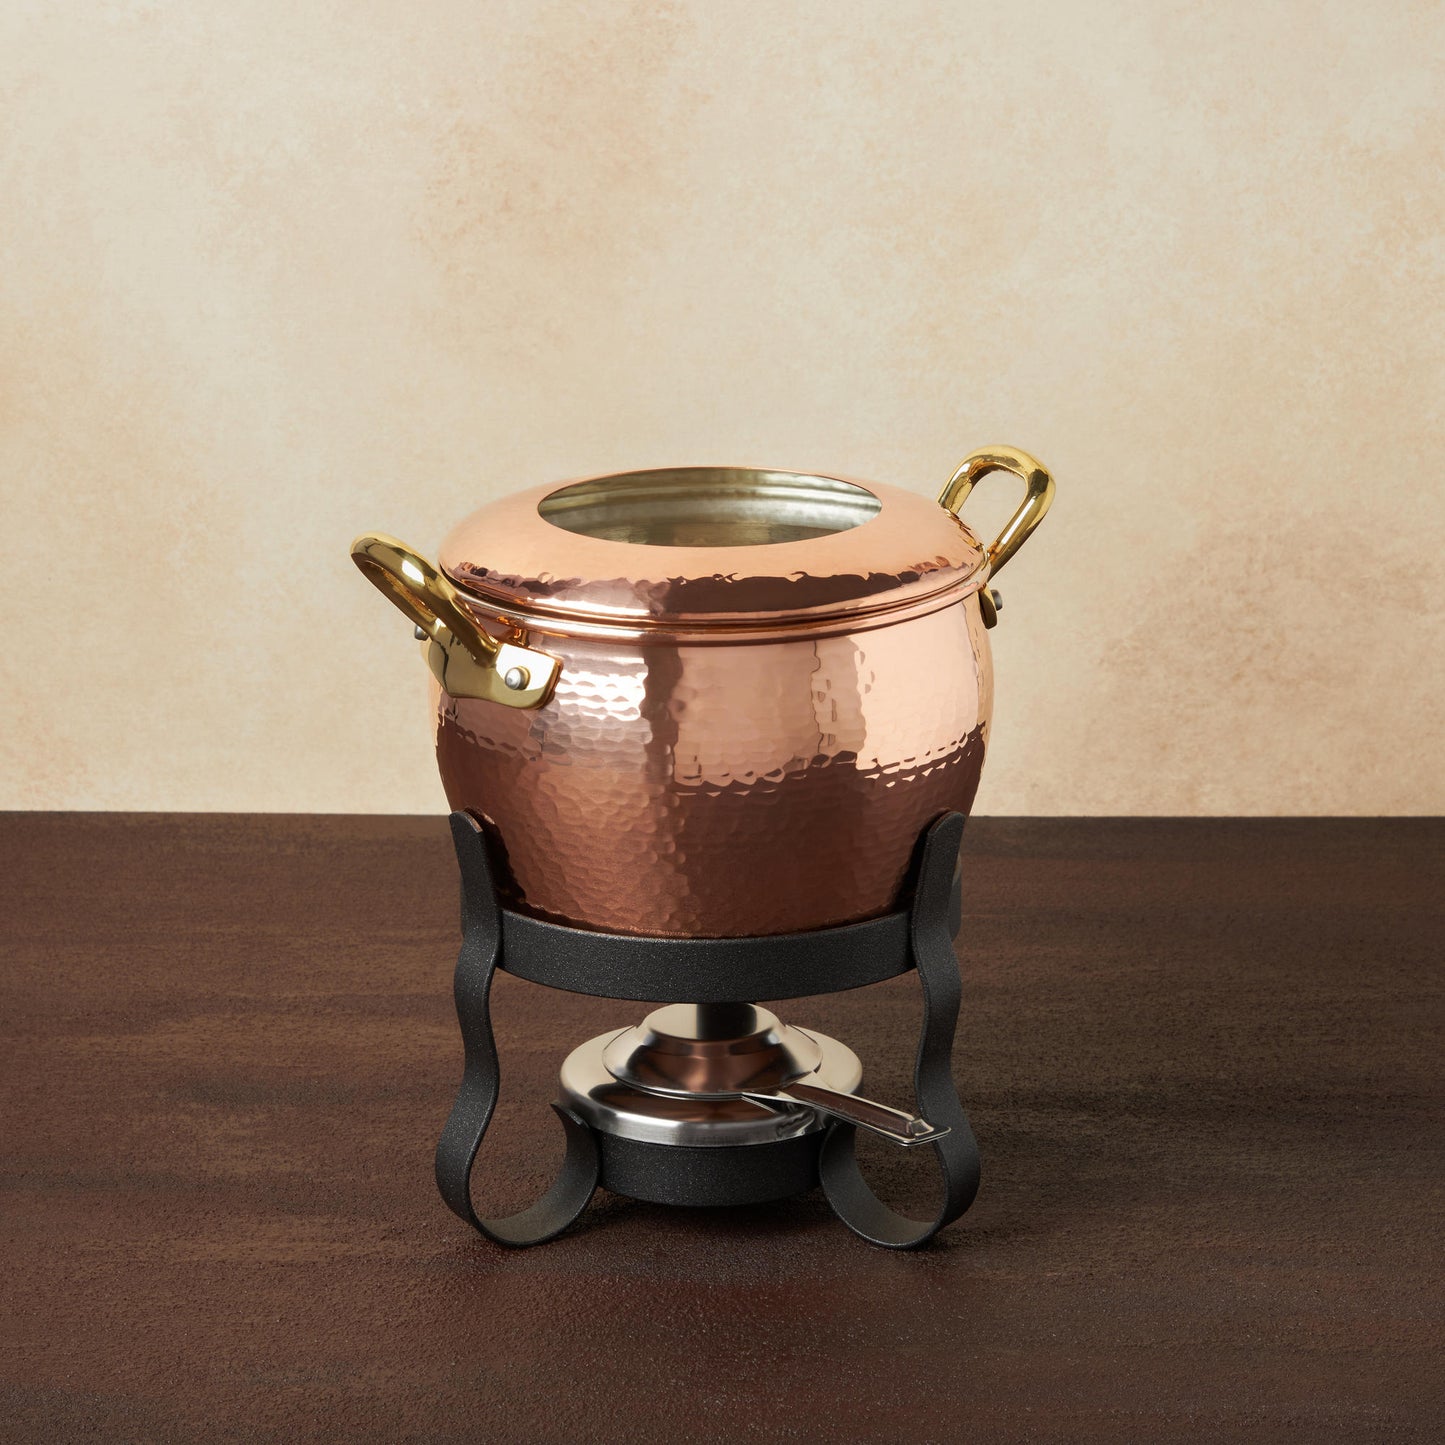 Hammered copper 4 Piece Foundue Michelle  Set lined with high purity tin applied by hand over fire and bronze handles, from Ruffoni Historia collection